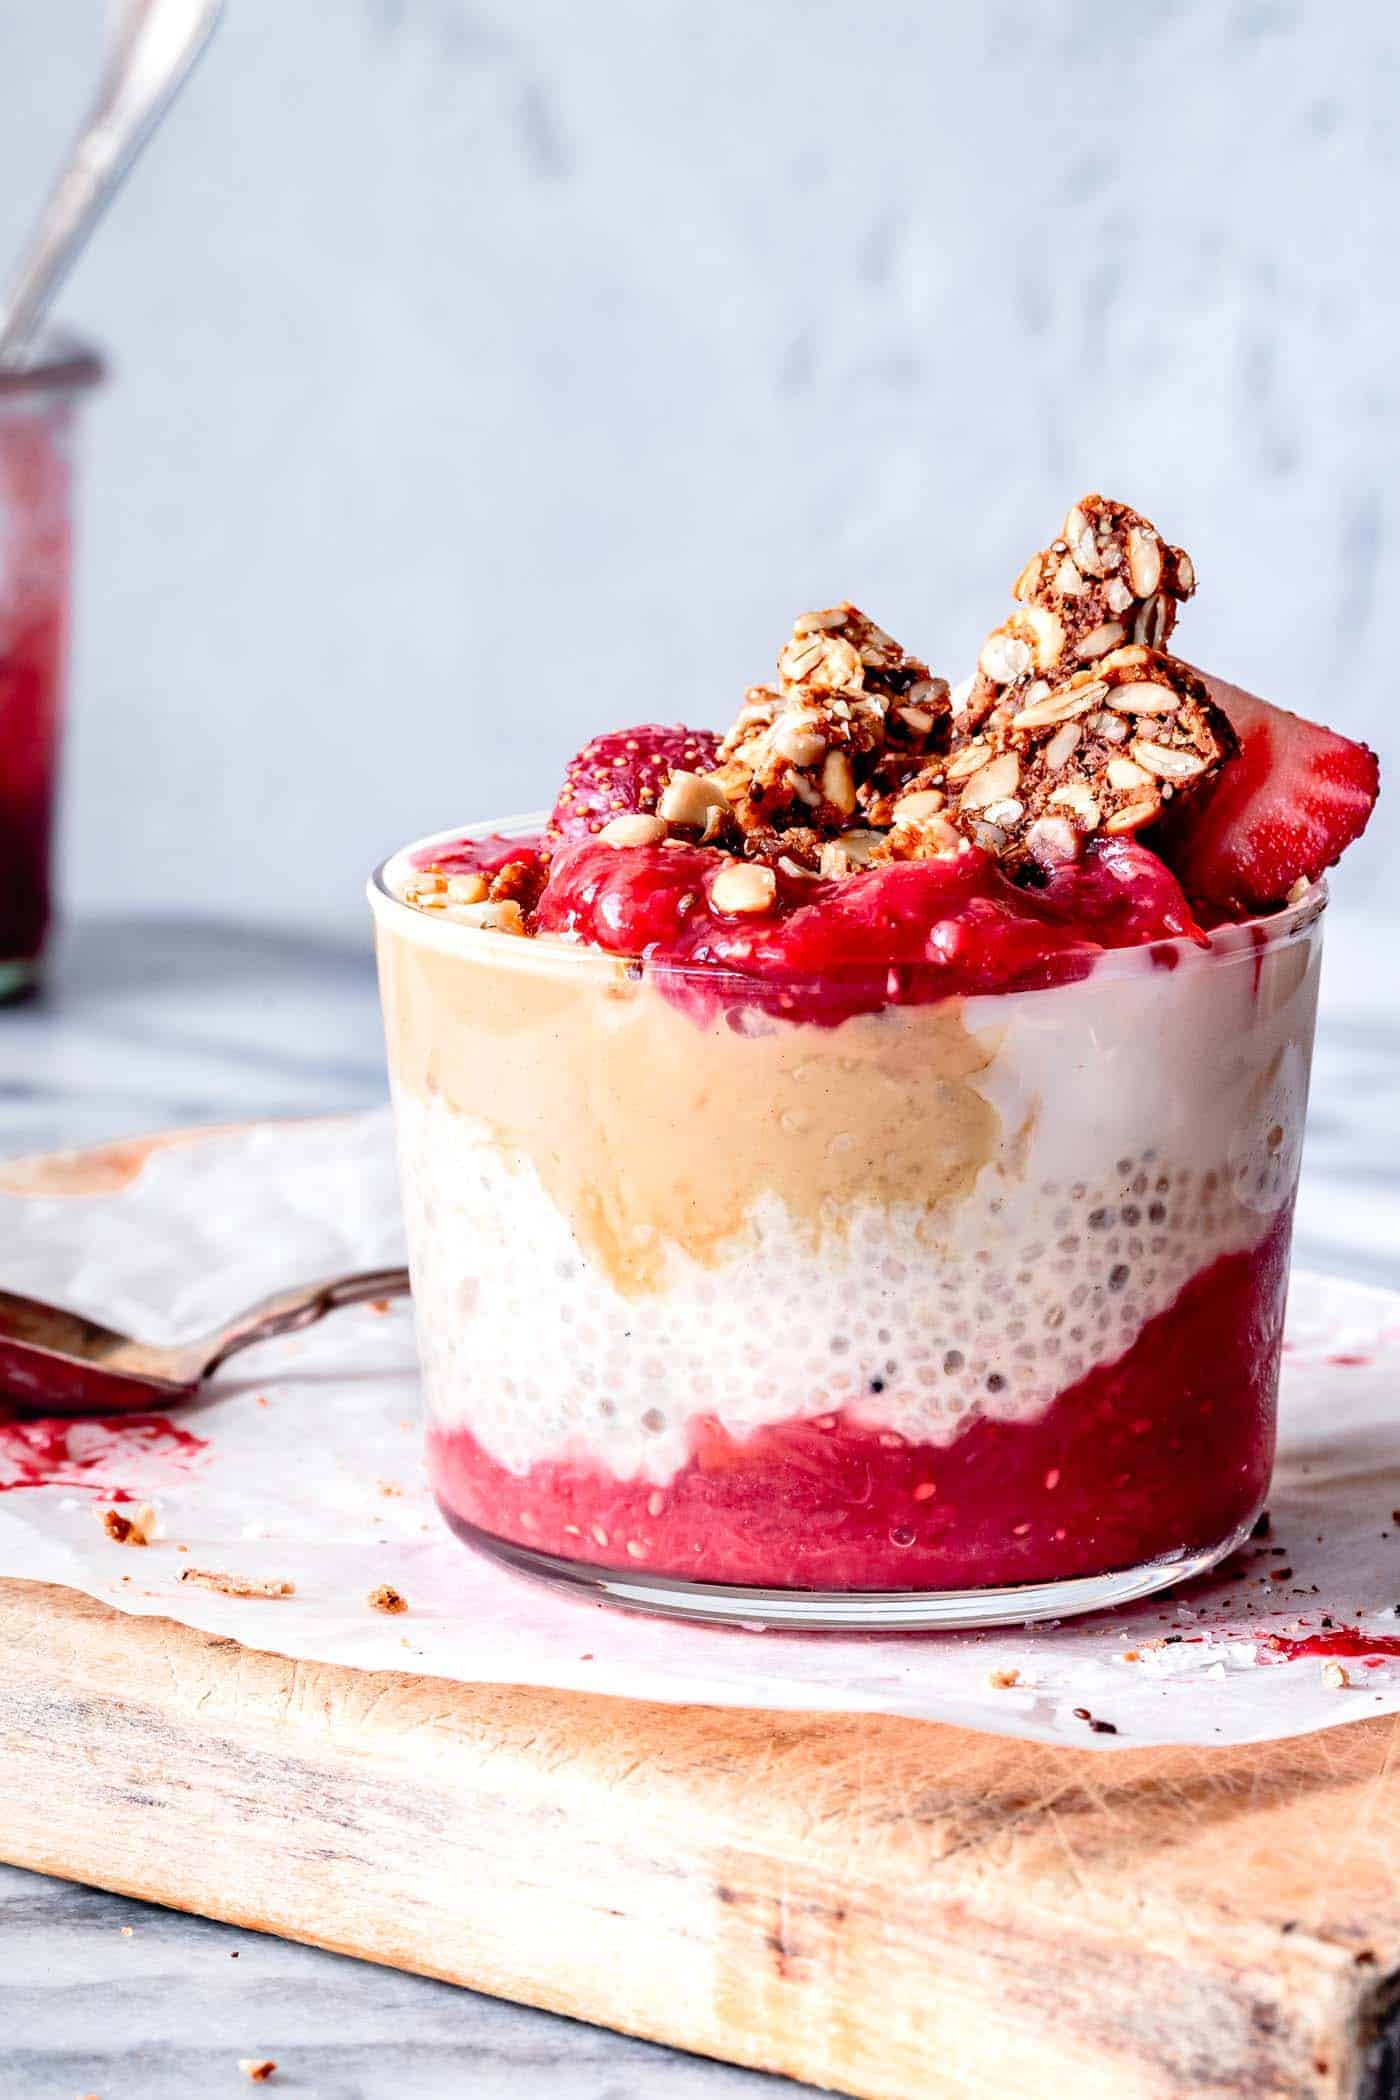 chia pudding layered with red jam and tahini topped with chopped granola bar